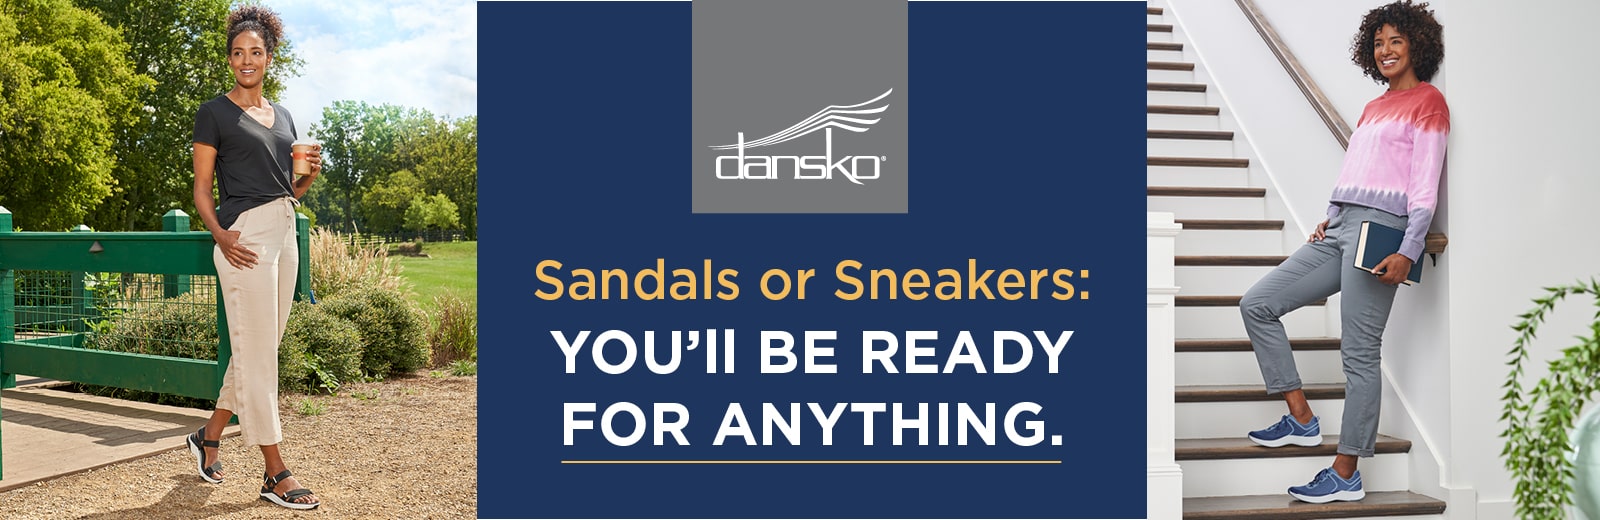 Dansko sandals and sneakers for whatever life has in store!